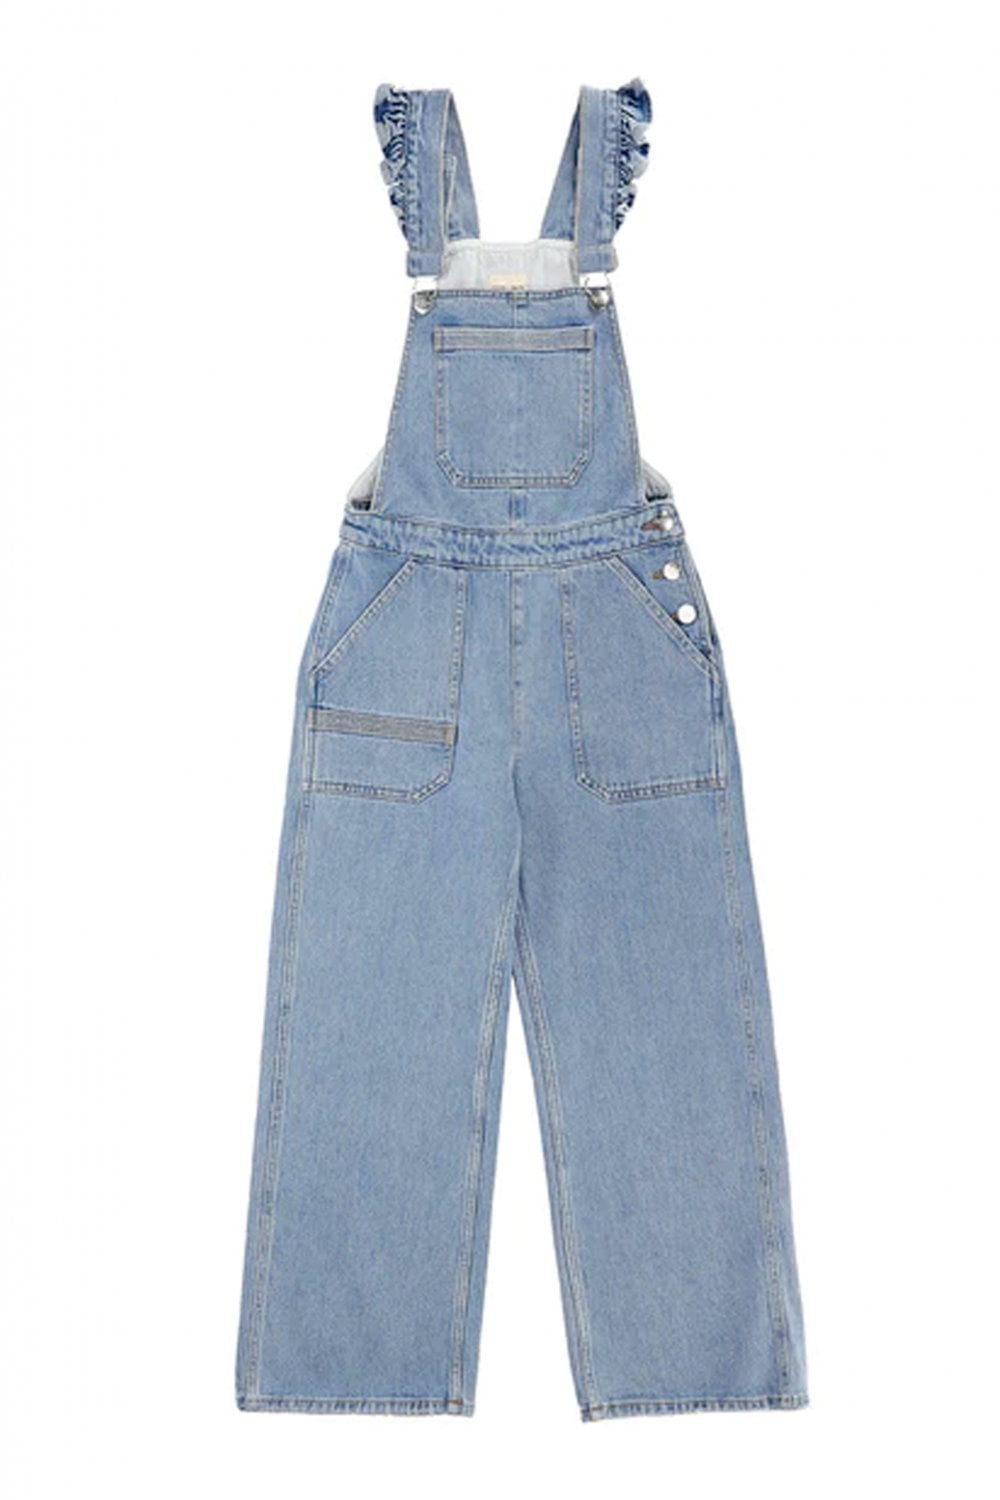 SEVENTY + MOCHI Elodie Dungaree In Rodeo Vintage